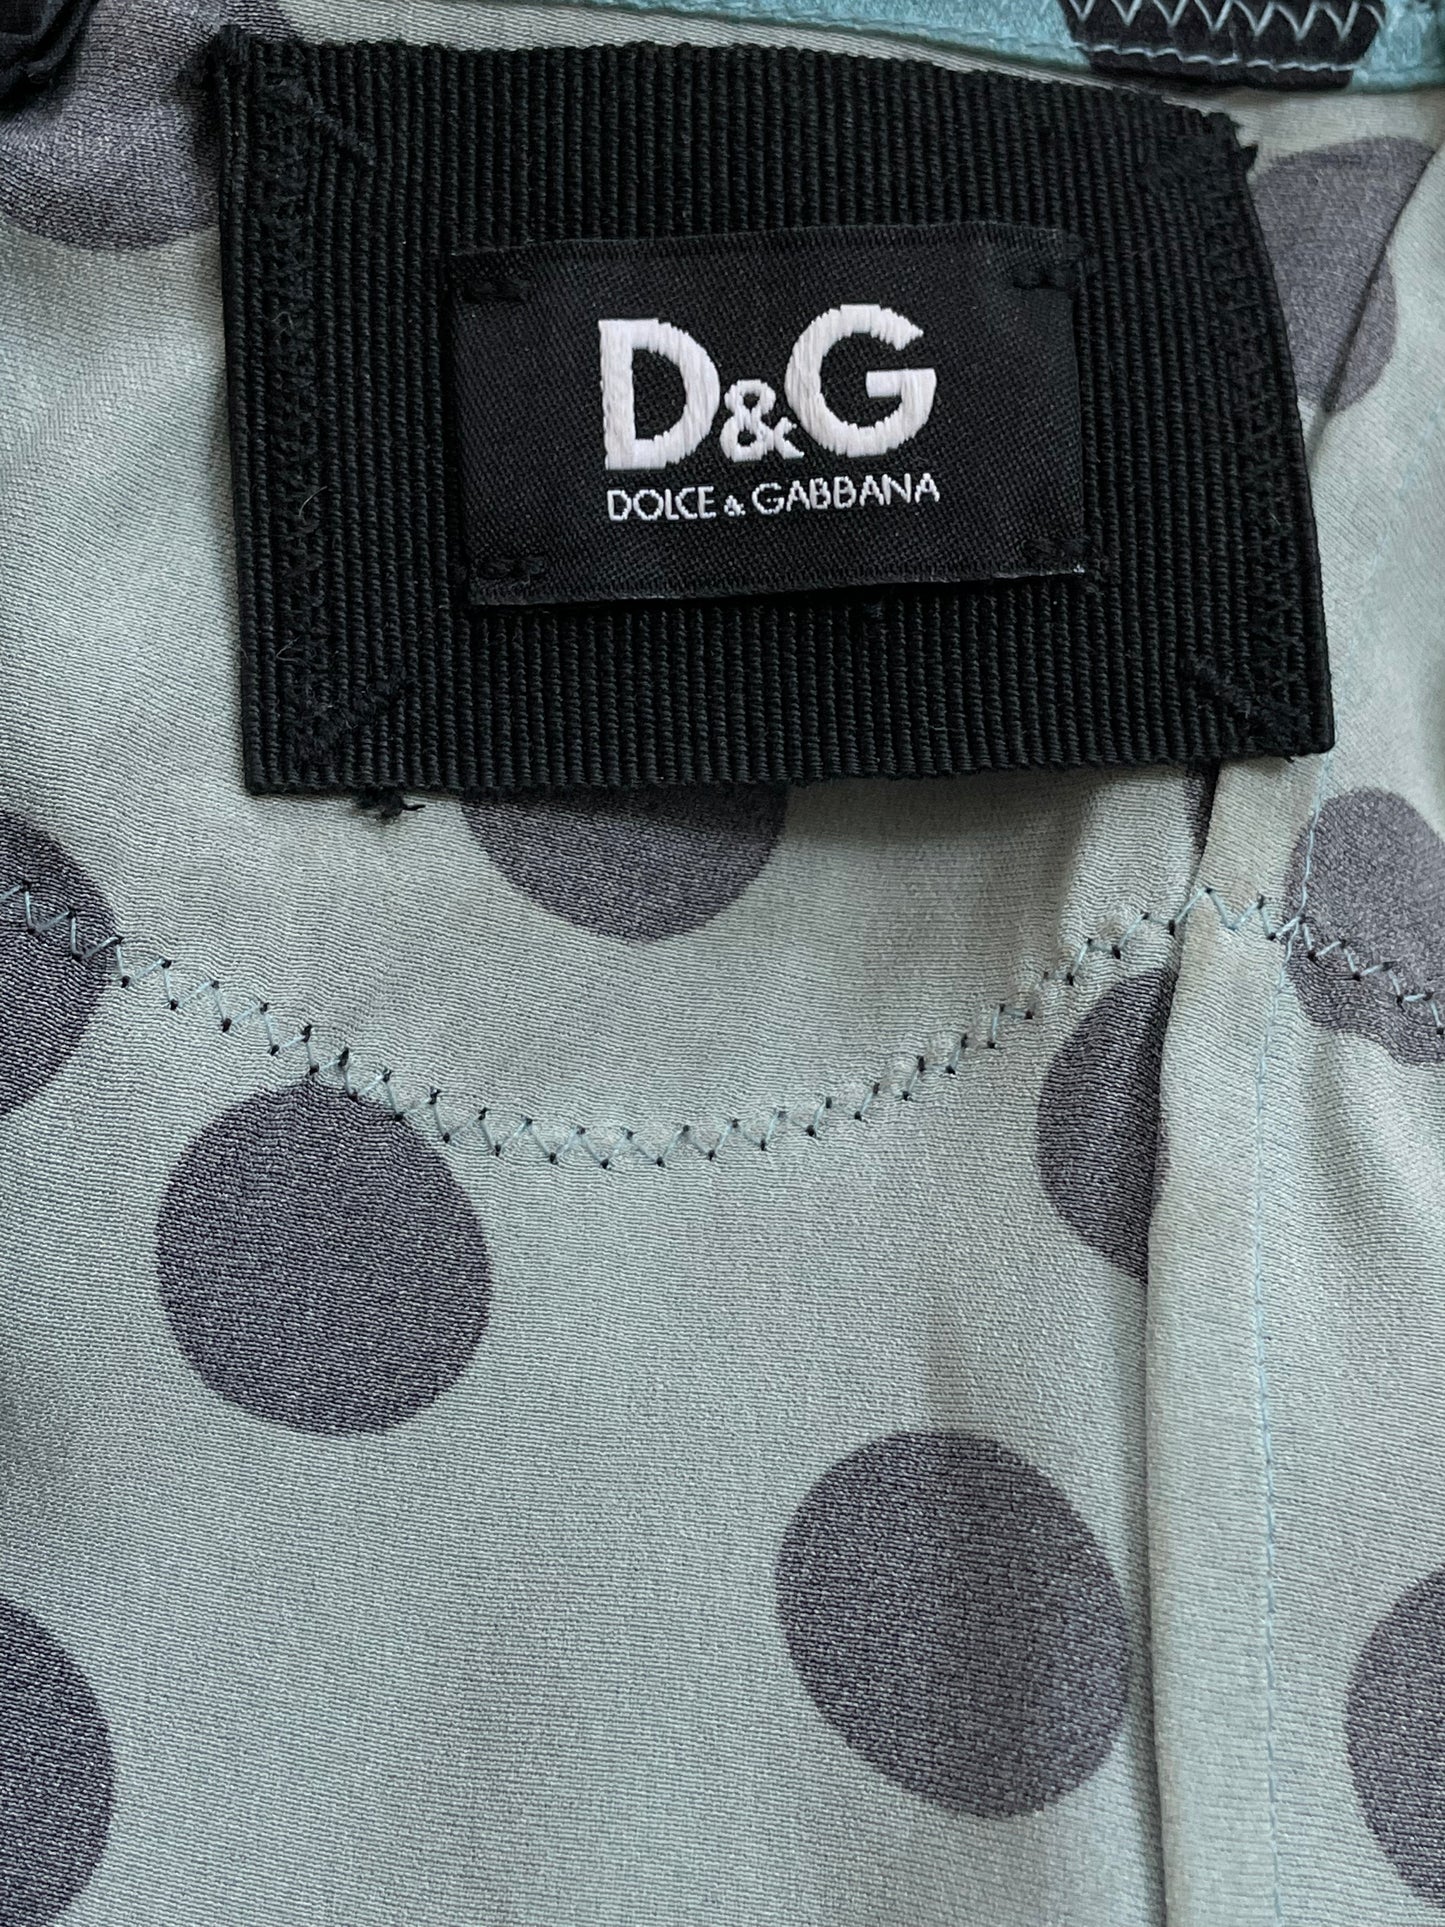 Dolce and Gabbana top